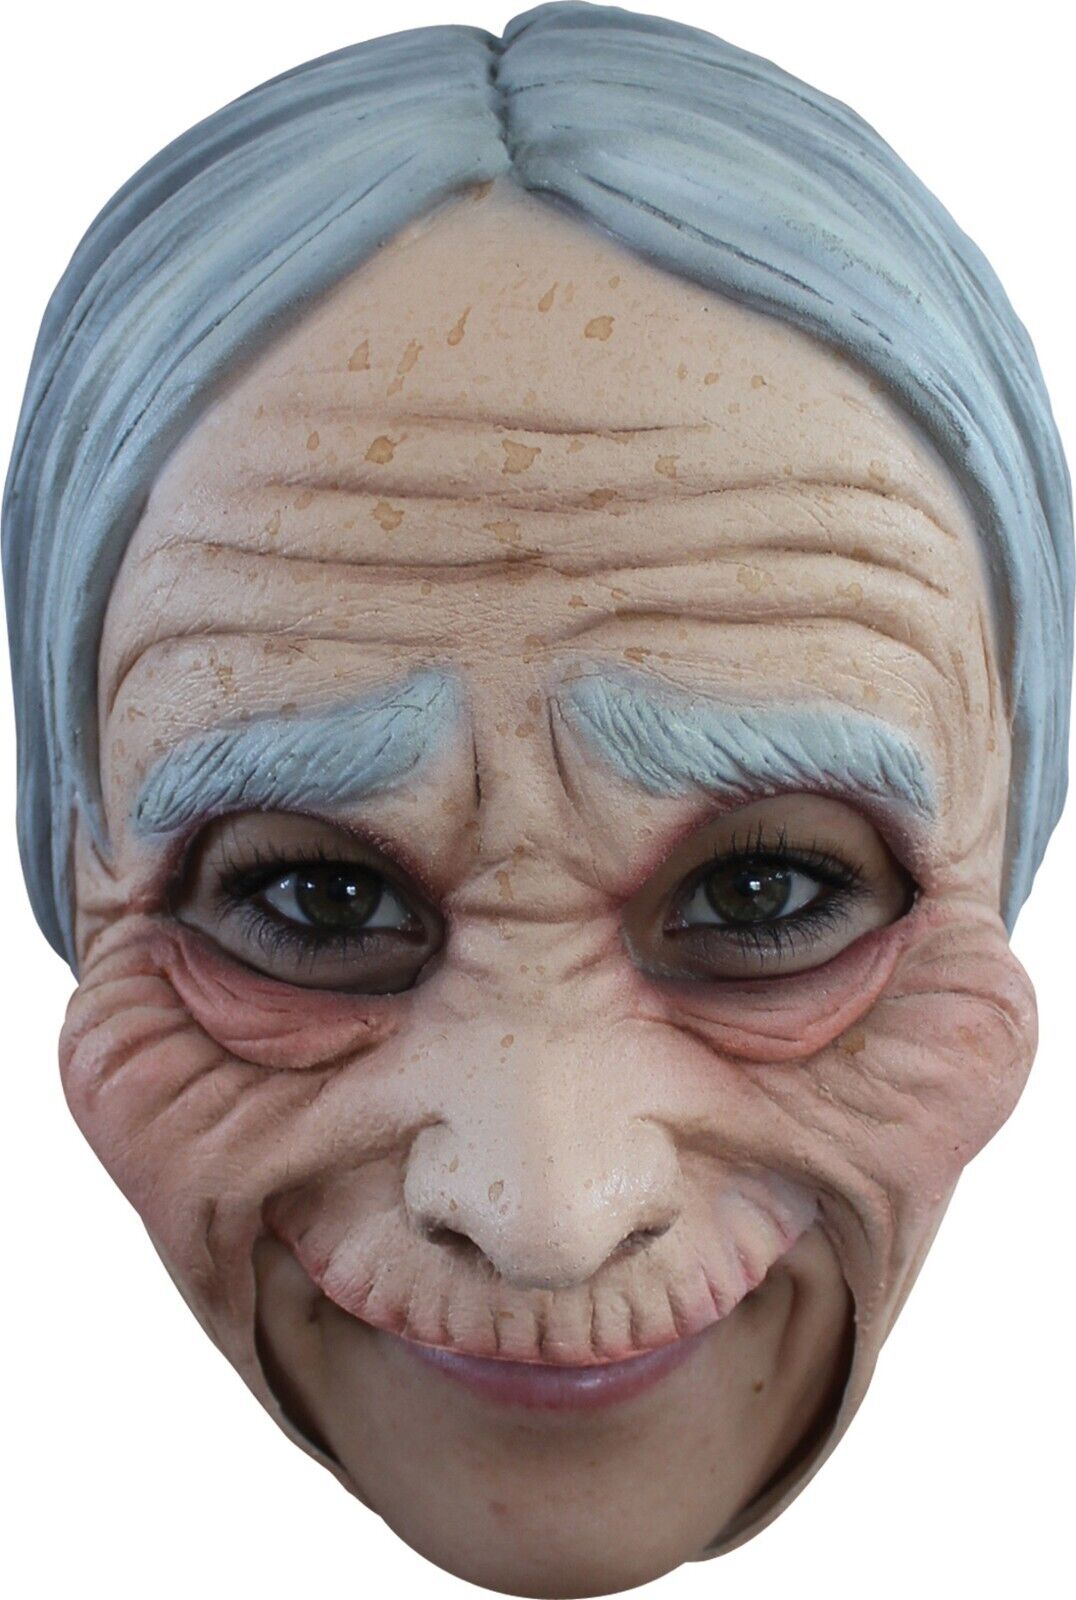 Morris Costumes Adult Old Lady Super Realistic Chinless Over Head Latex Mask